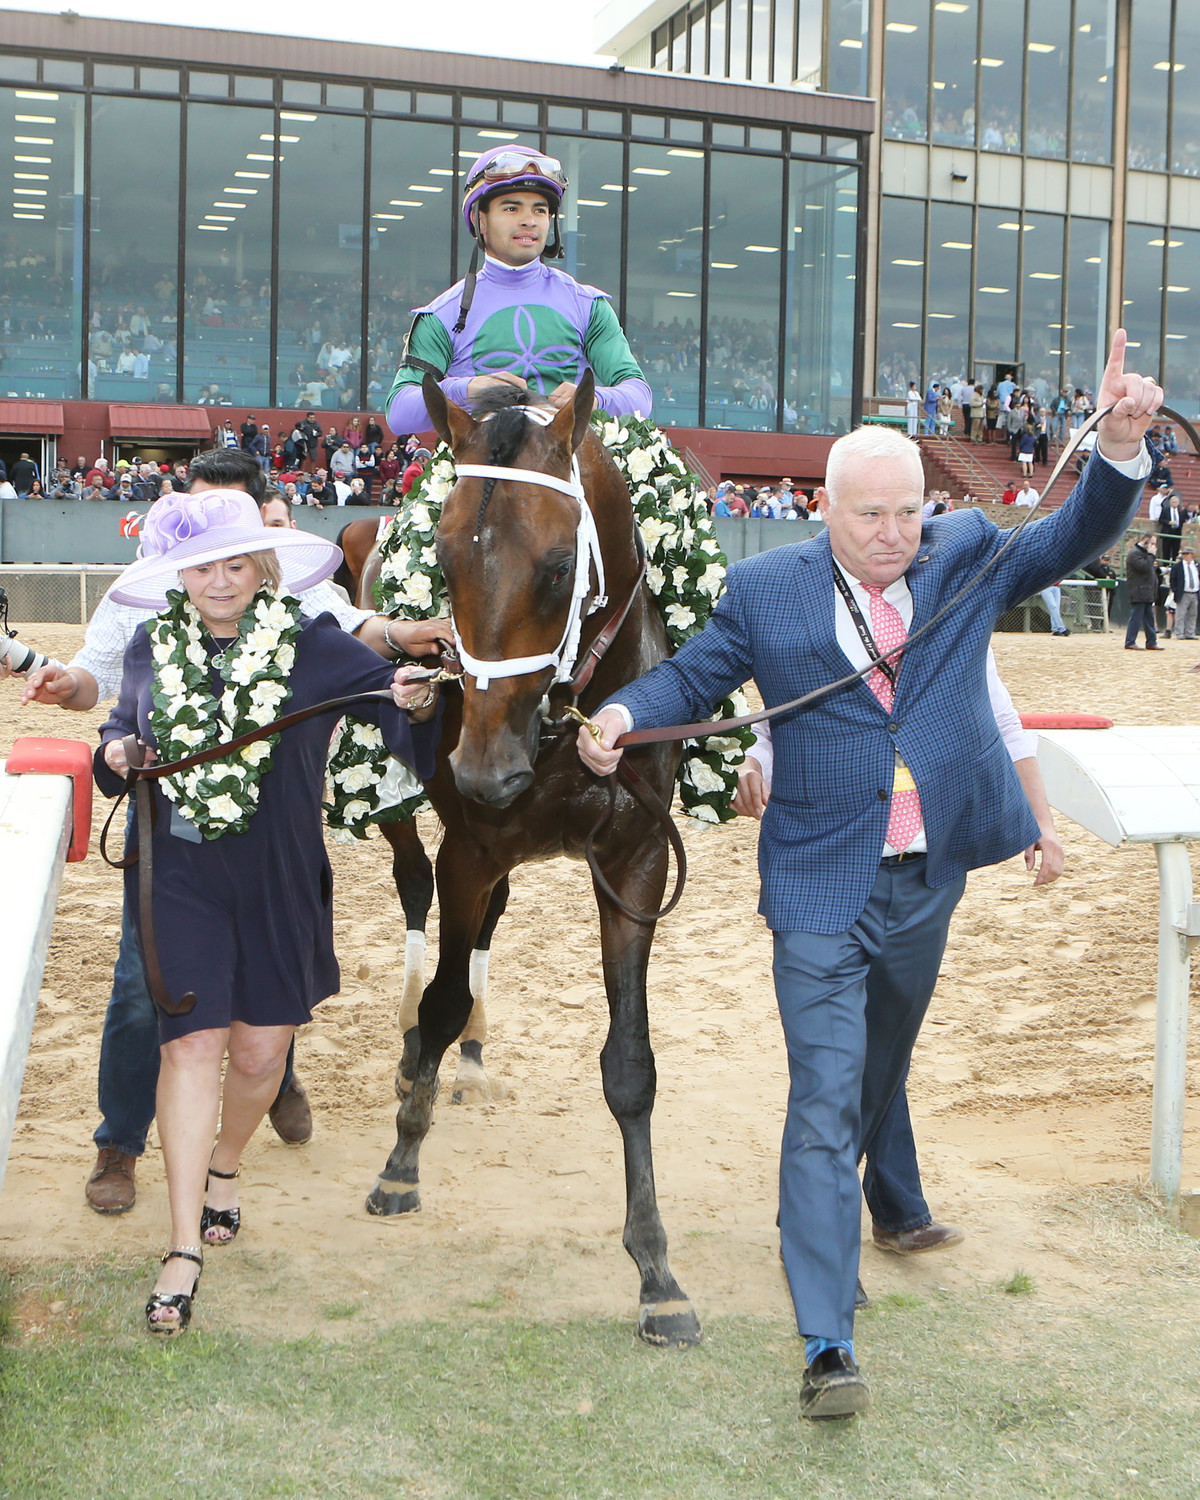 TO THE RACES
Prime Inc. owner Robert Low’s racehorse Magnum Moon wins the Arkansas Derby, qualifying him for the Kentucky Derby. Low, right, is pictured with his wife Lawana and jockey Luis Saez riding Magnum Moon.